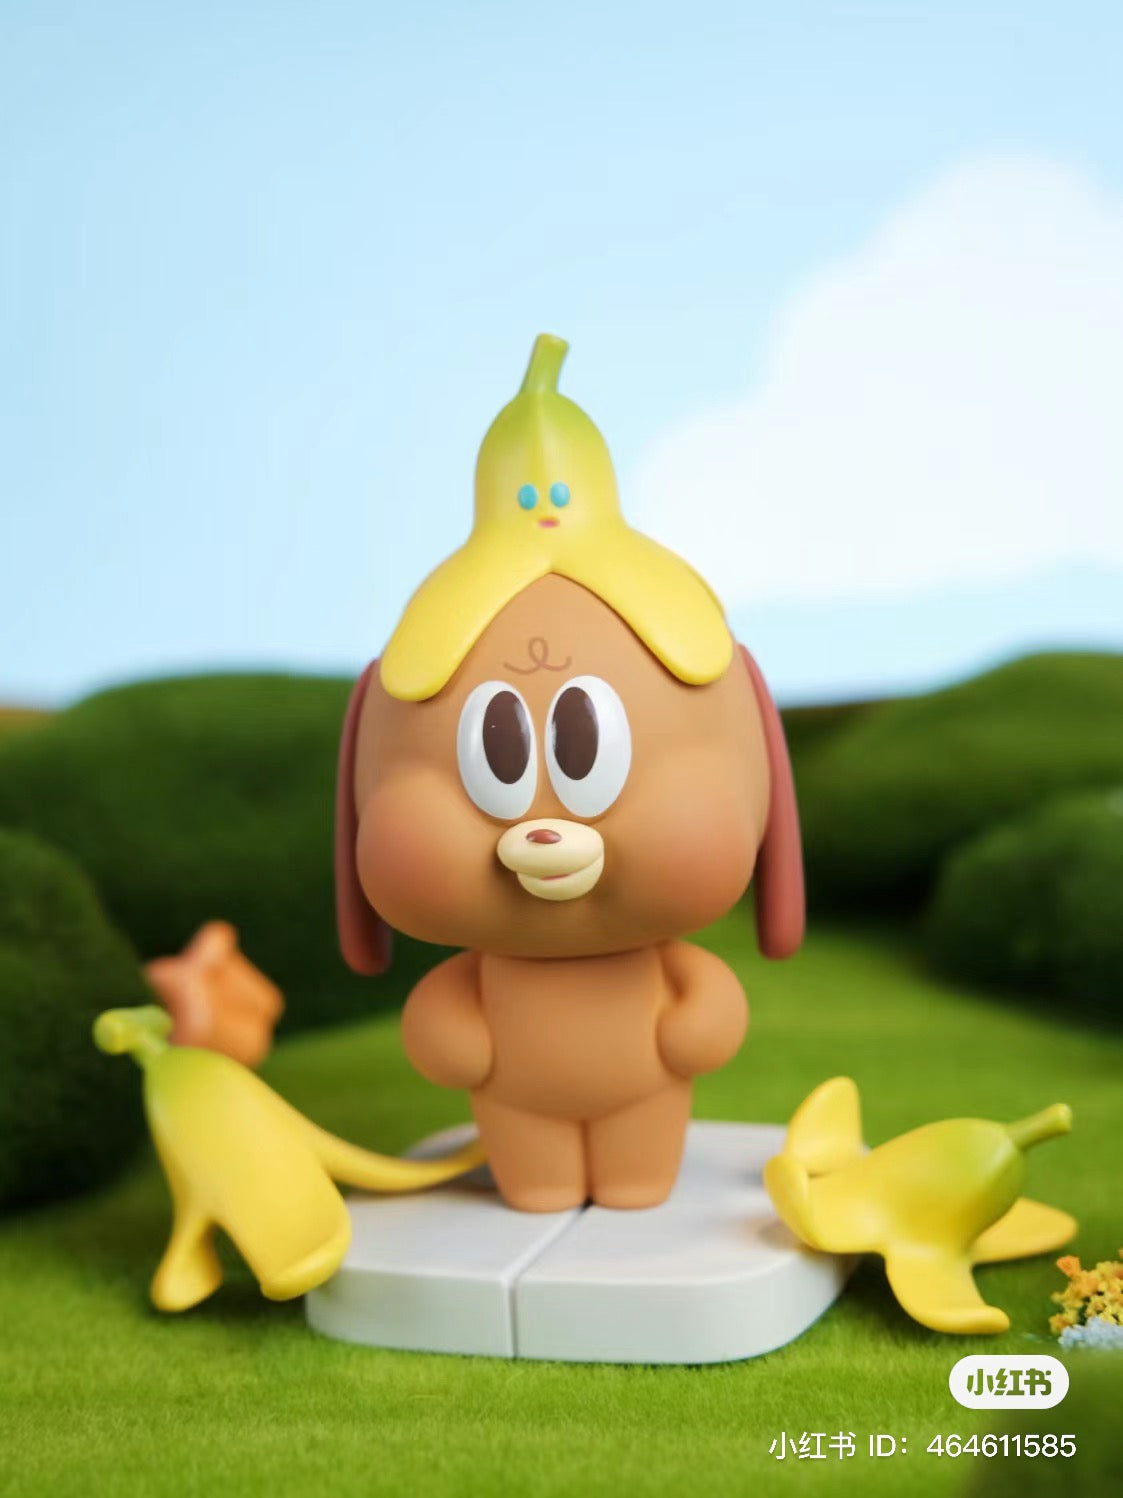 A cartoon animal figurine from the HAPPY & COCKY Blind Box Series with a banana on its head, surrounded by toys and grass. Preorder now from Strangecat Toys.